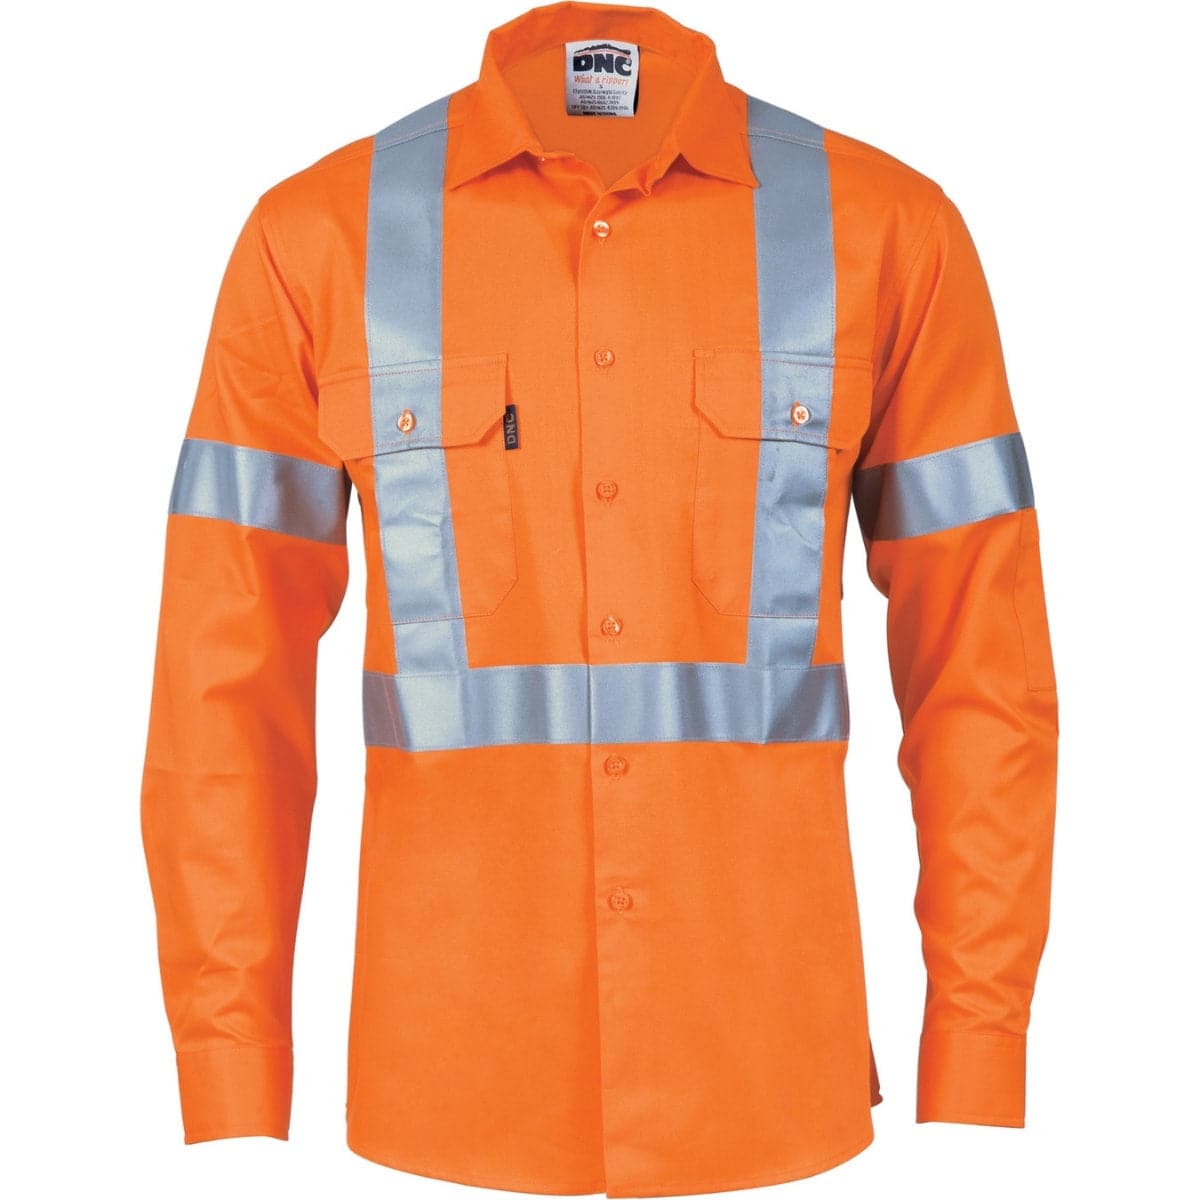 DNC HiVis Cool-Breeze Cotton Shirt With ‘X’ Back & Additional 3M R/Tape on Back - Long Sleeve 3746